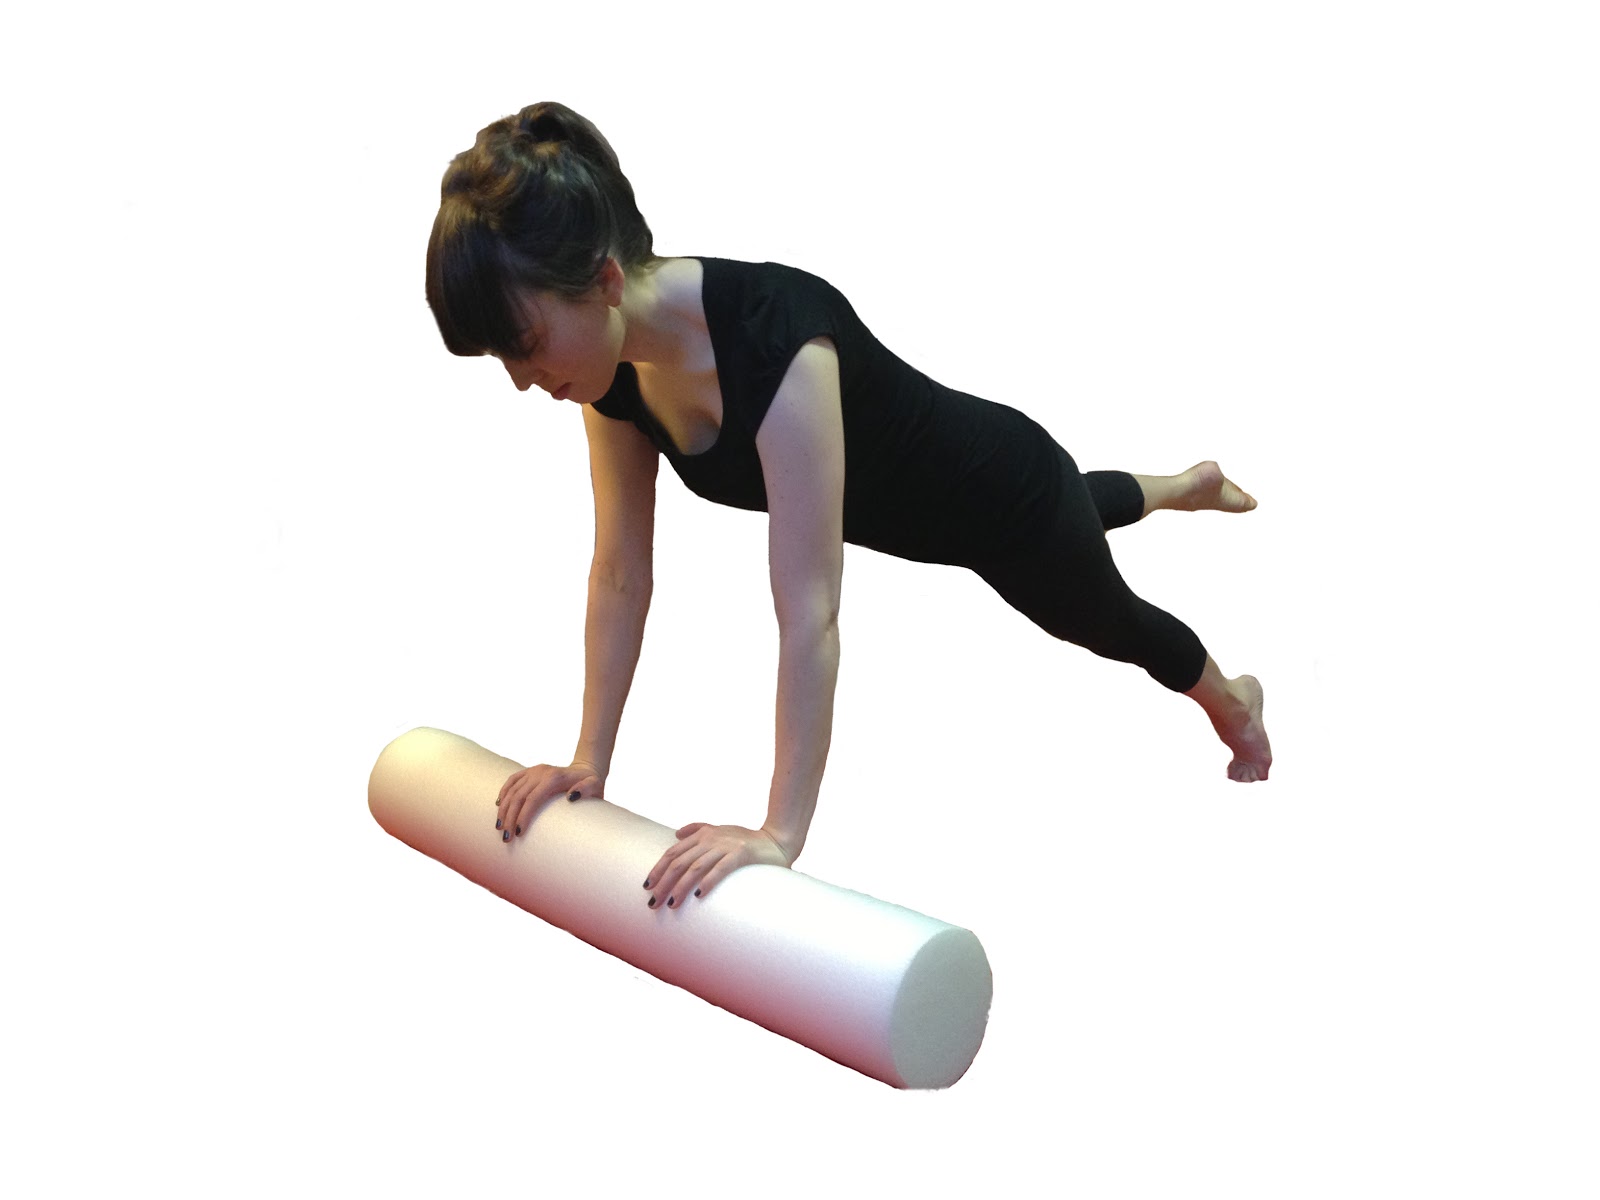 Exercise of the Day: Day 261- Leg Pull Front with Hands on Foam Roller